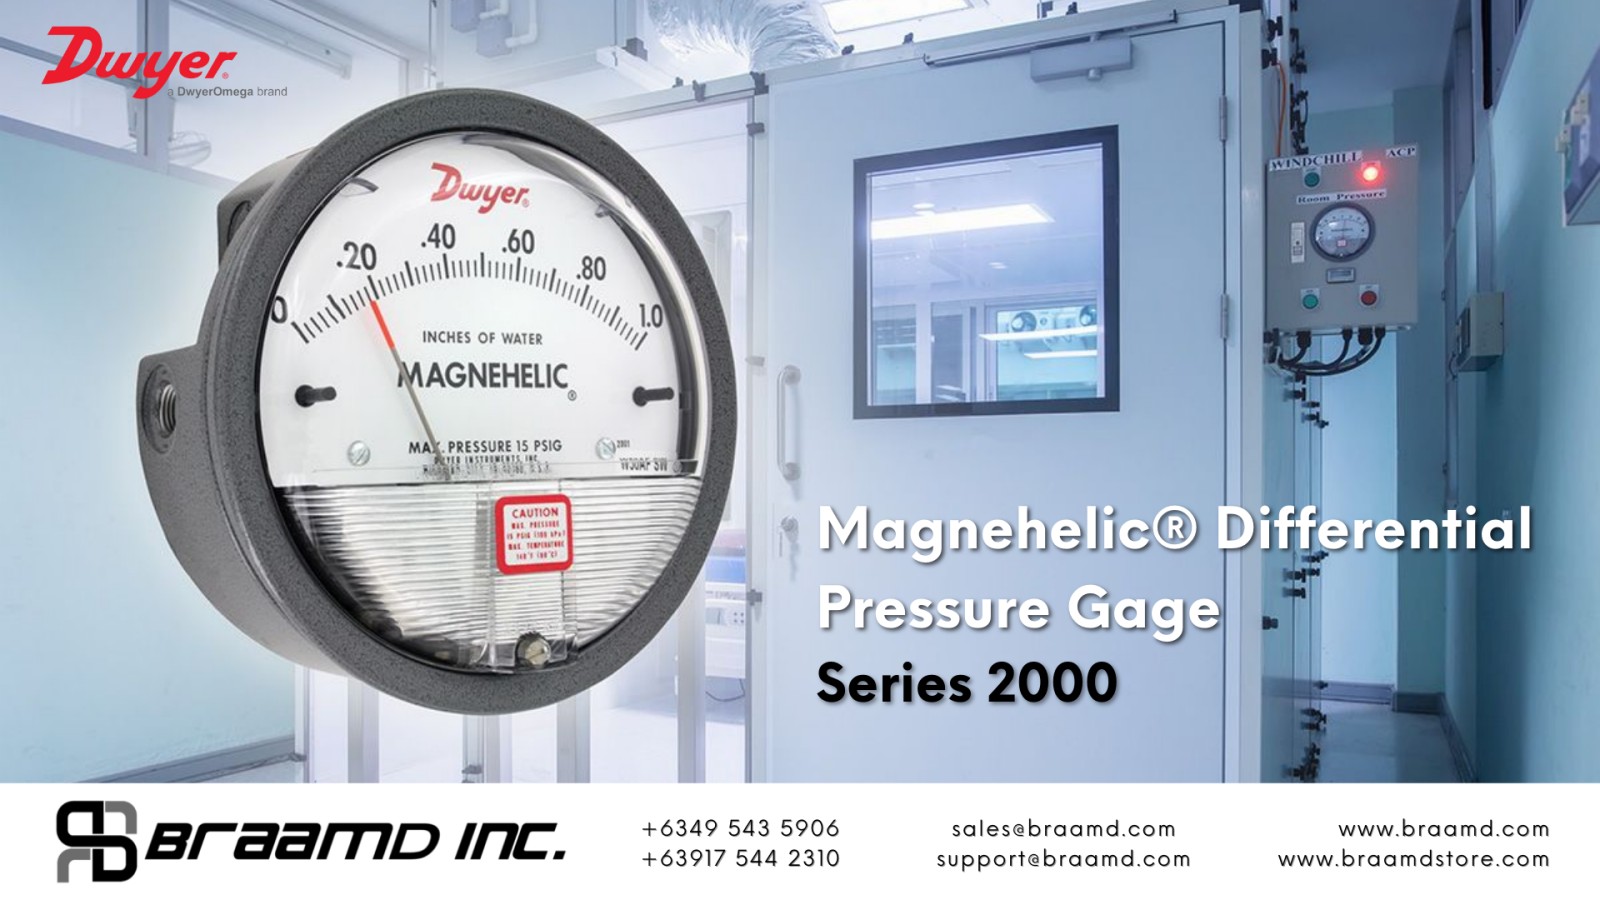 Authentic Dwyer Magnehelic® differential pressure gage